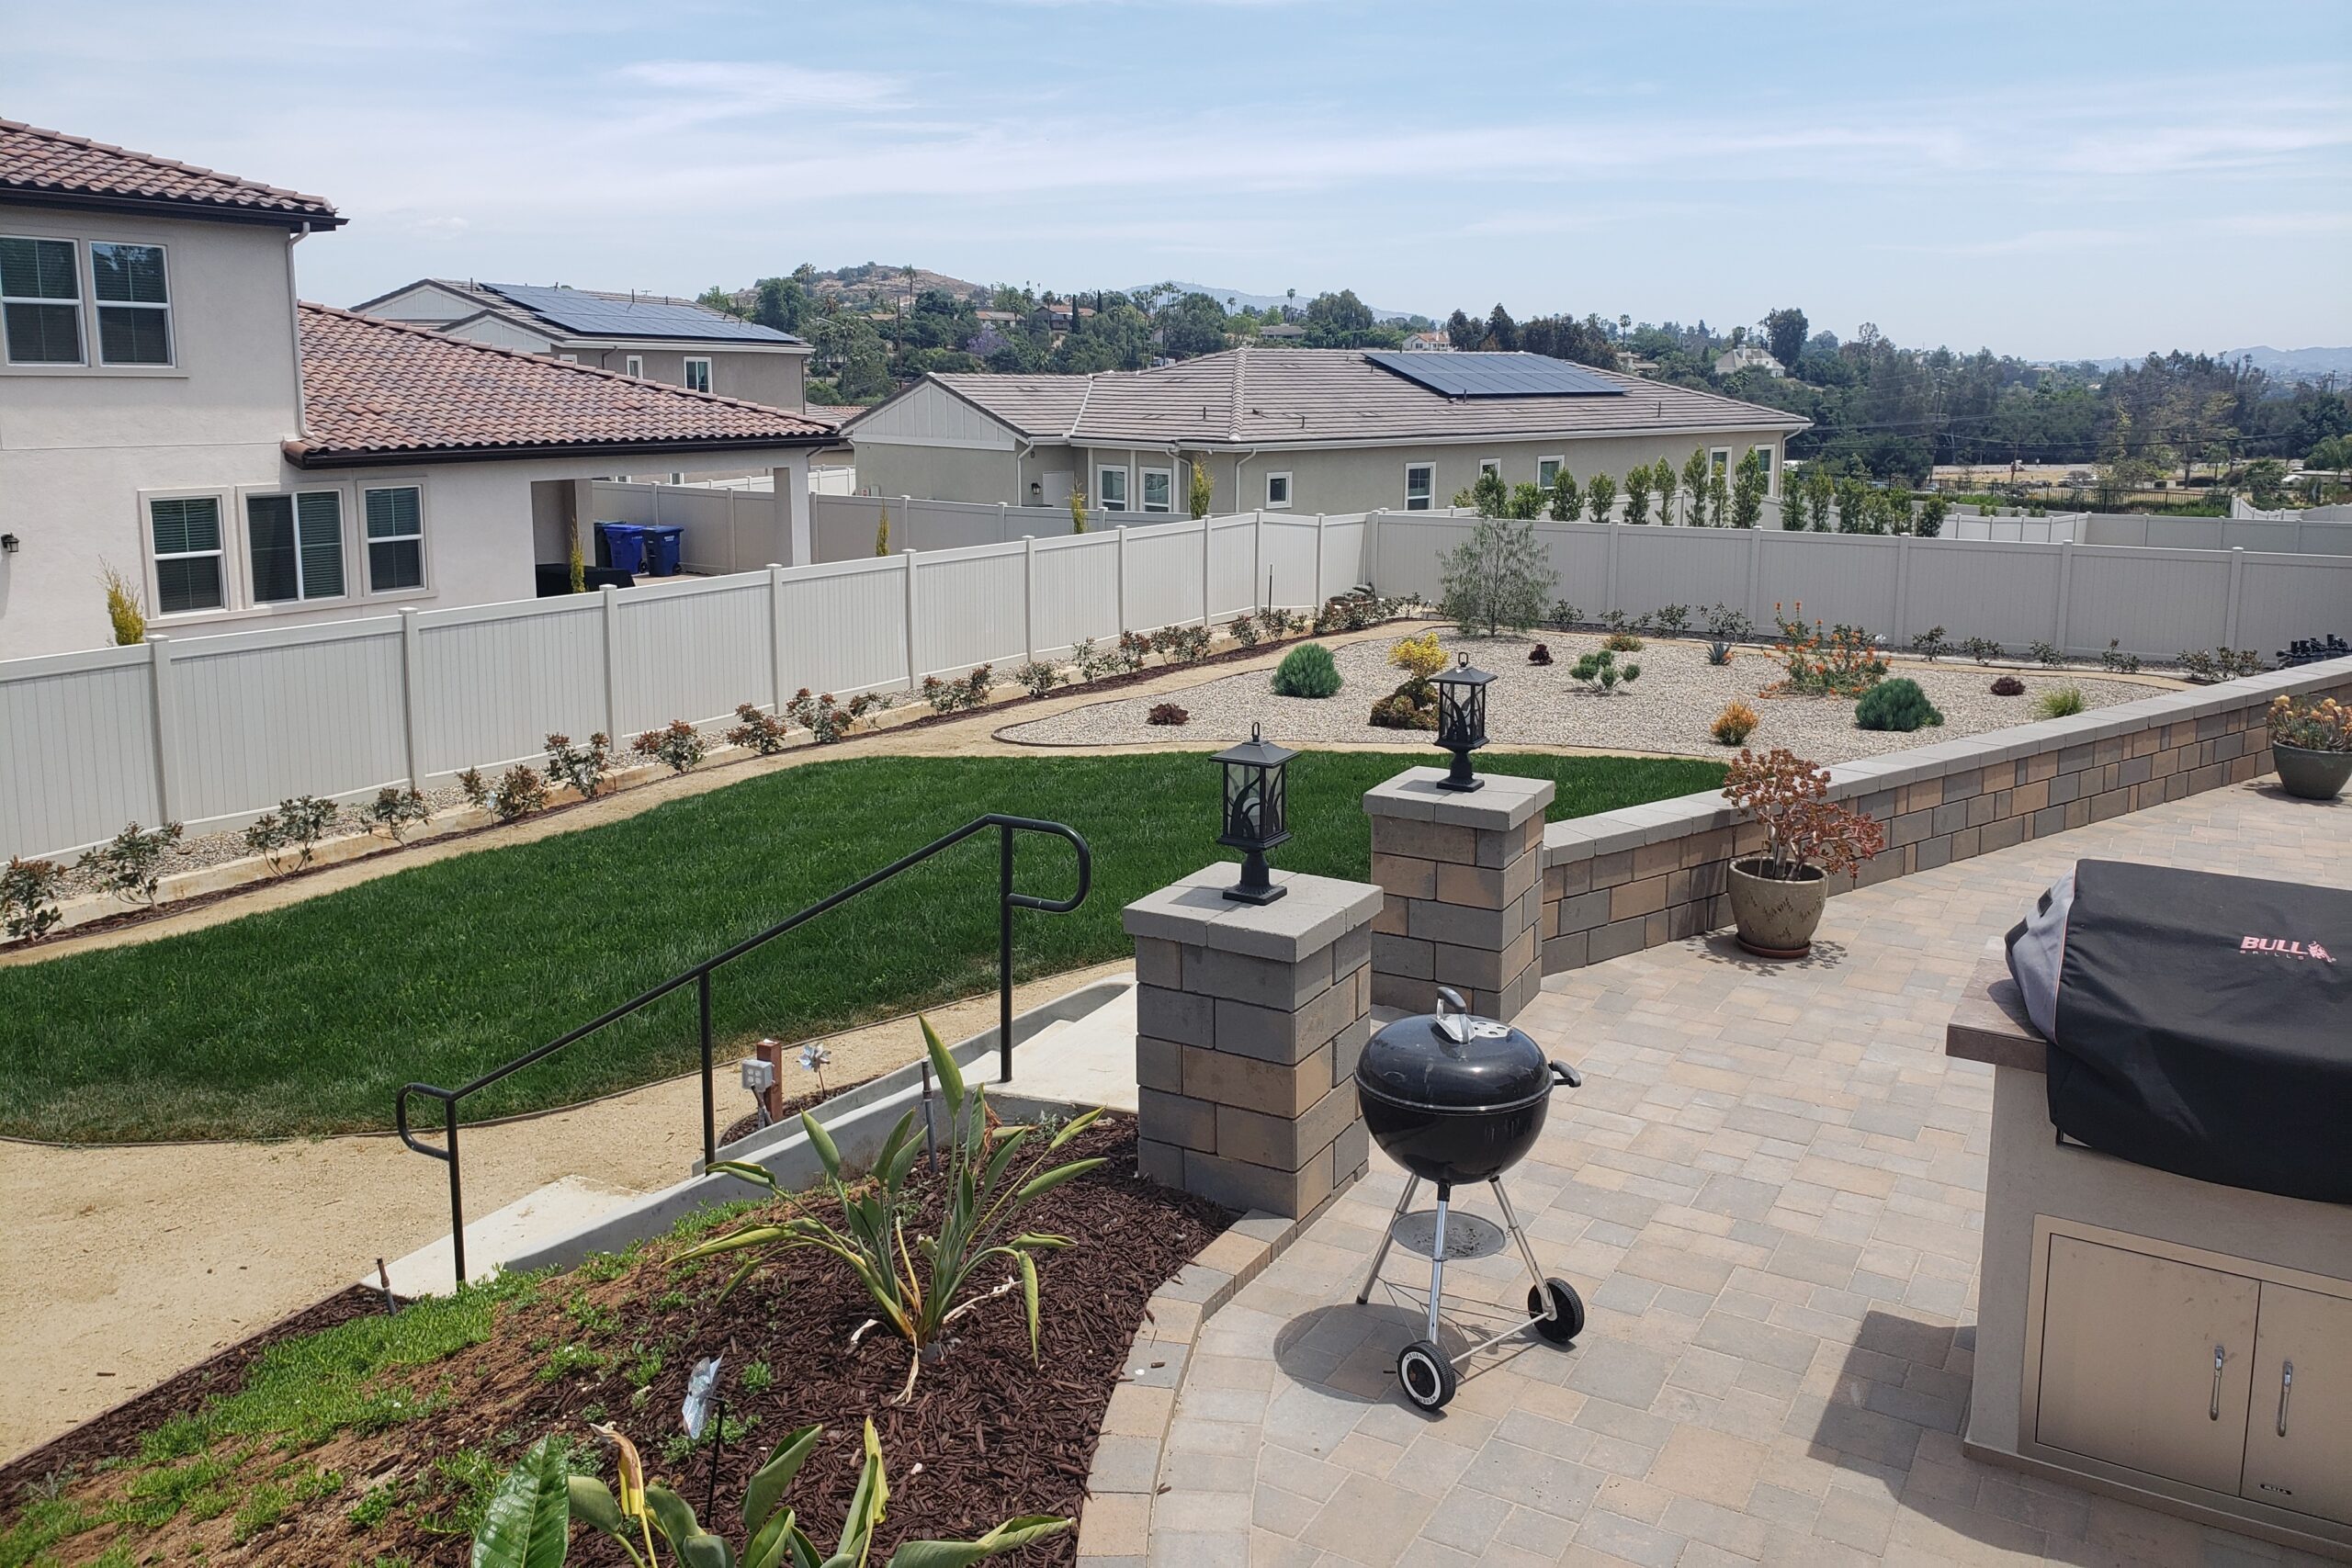 Backyard of tract home with small lawn and water-efficient landscaping. Fence separates yard from other homes; grill and paved deck in foreground - photo